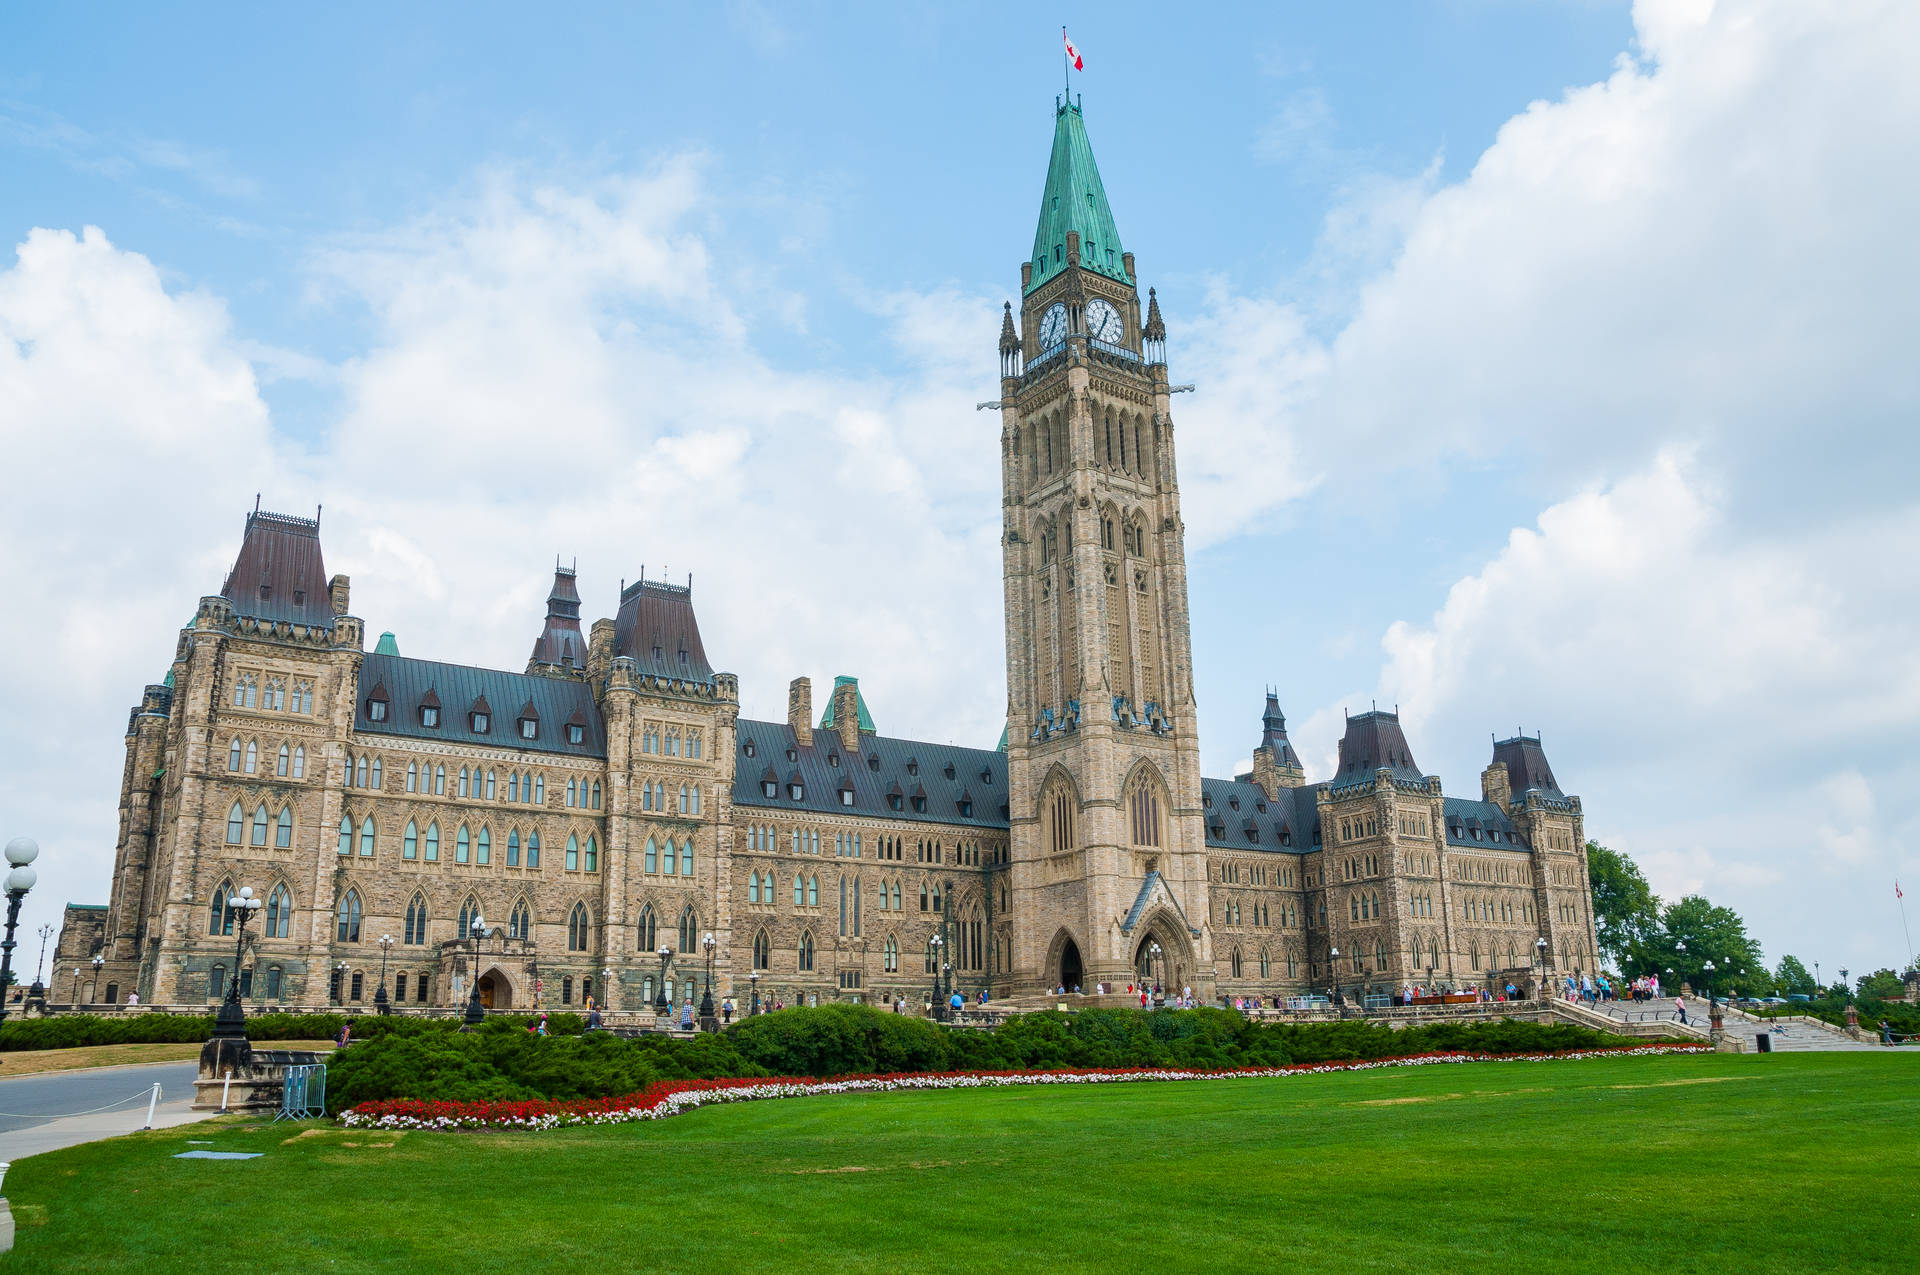 Caption: Canada's Iconic Peace Tower Against Blue Sky Background